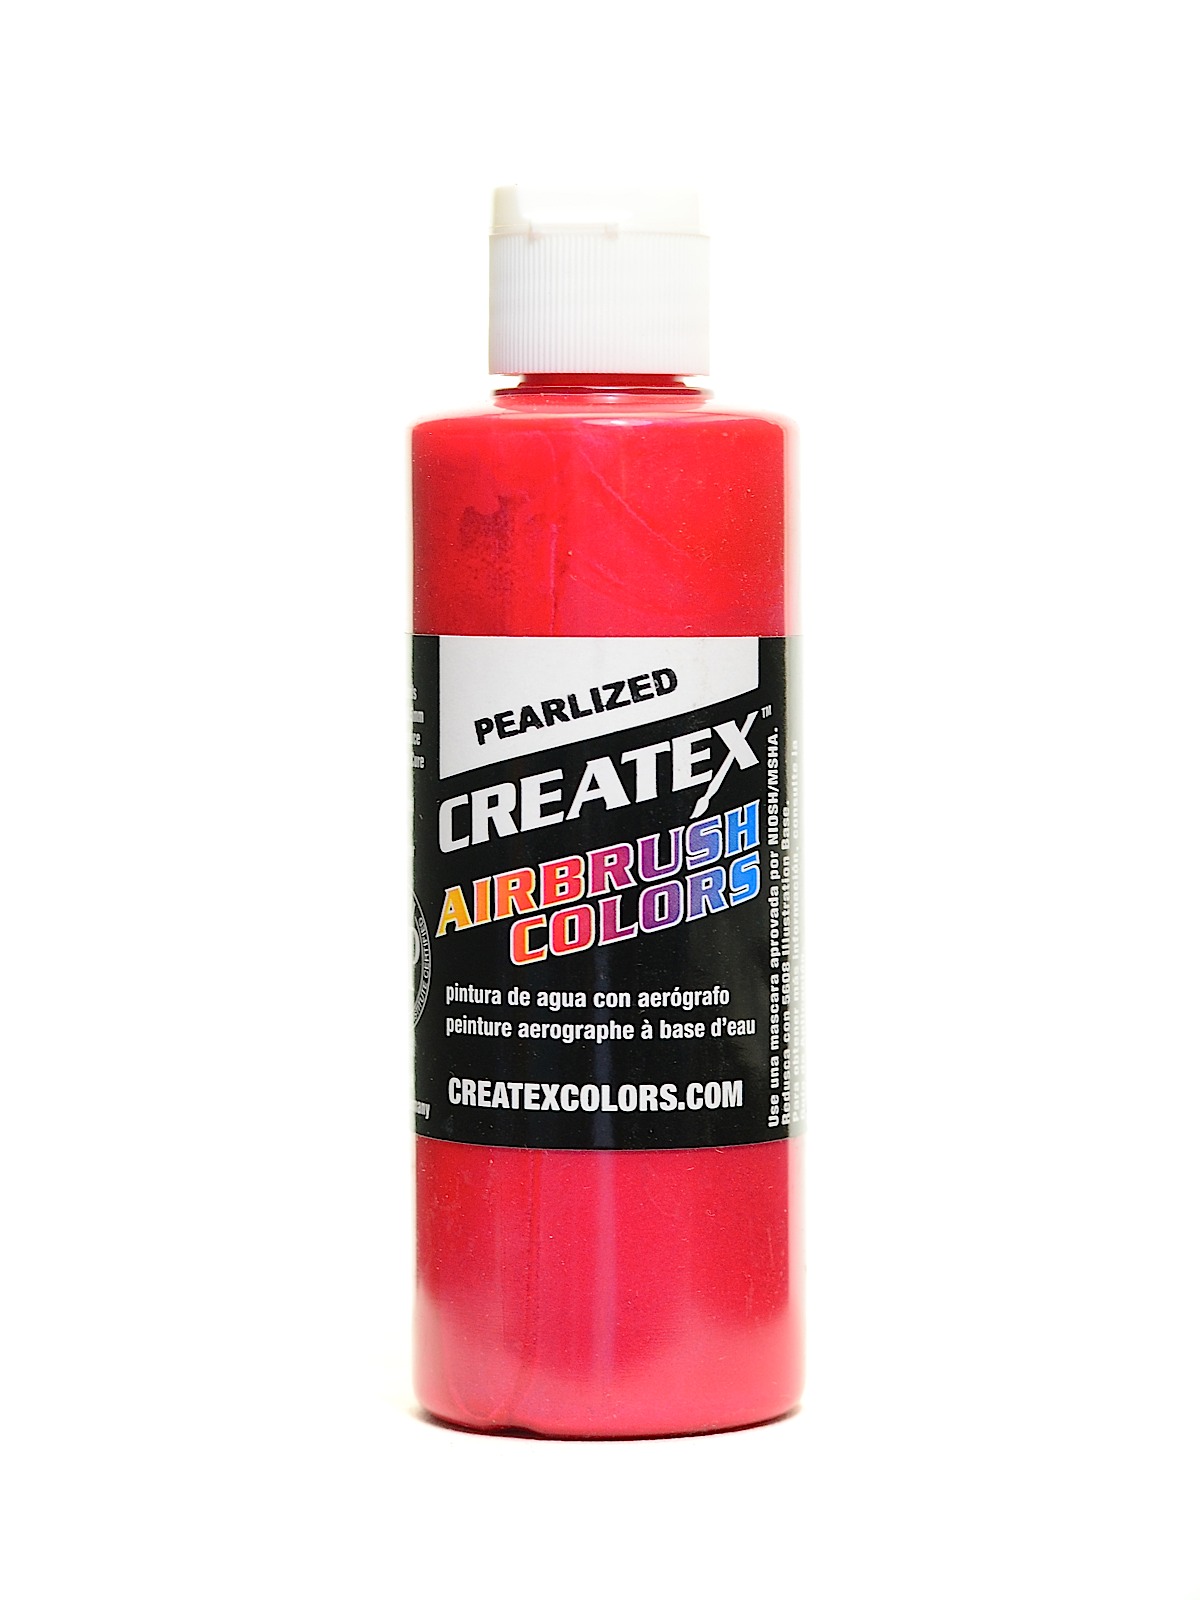 Airbrush Colors Pearl Red 4 Oz.